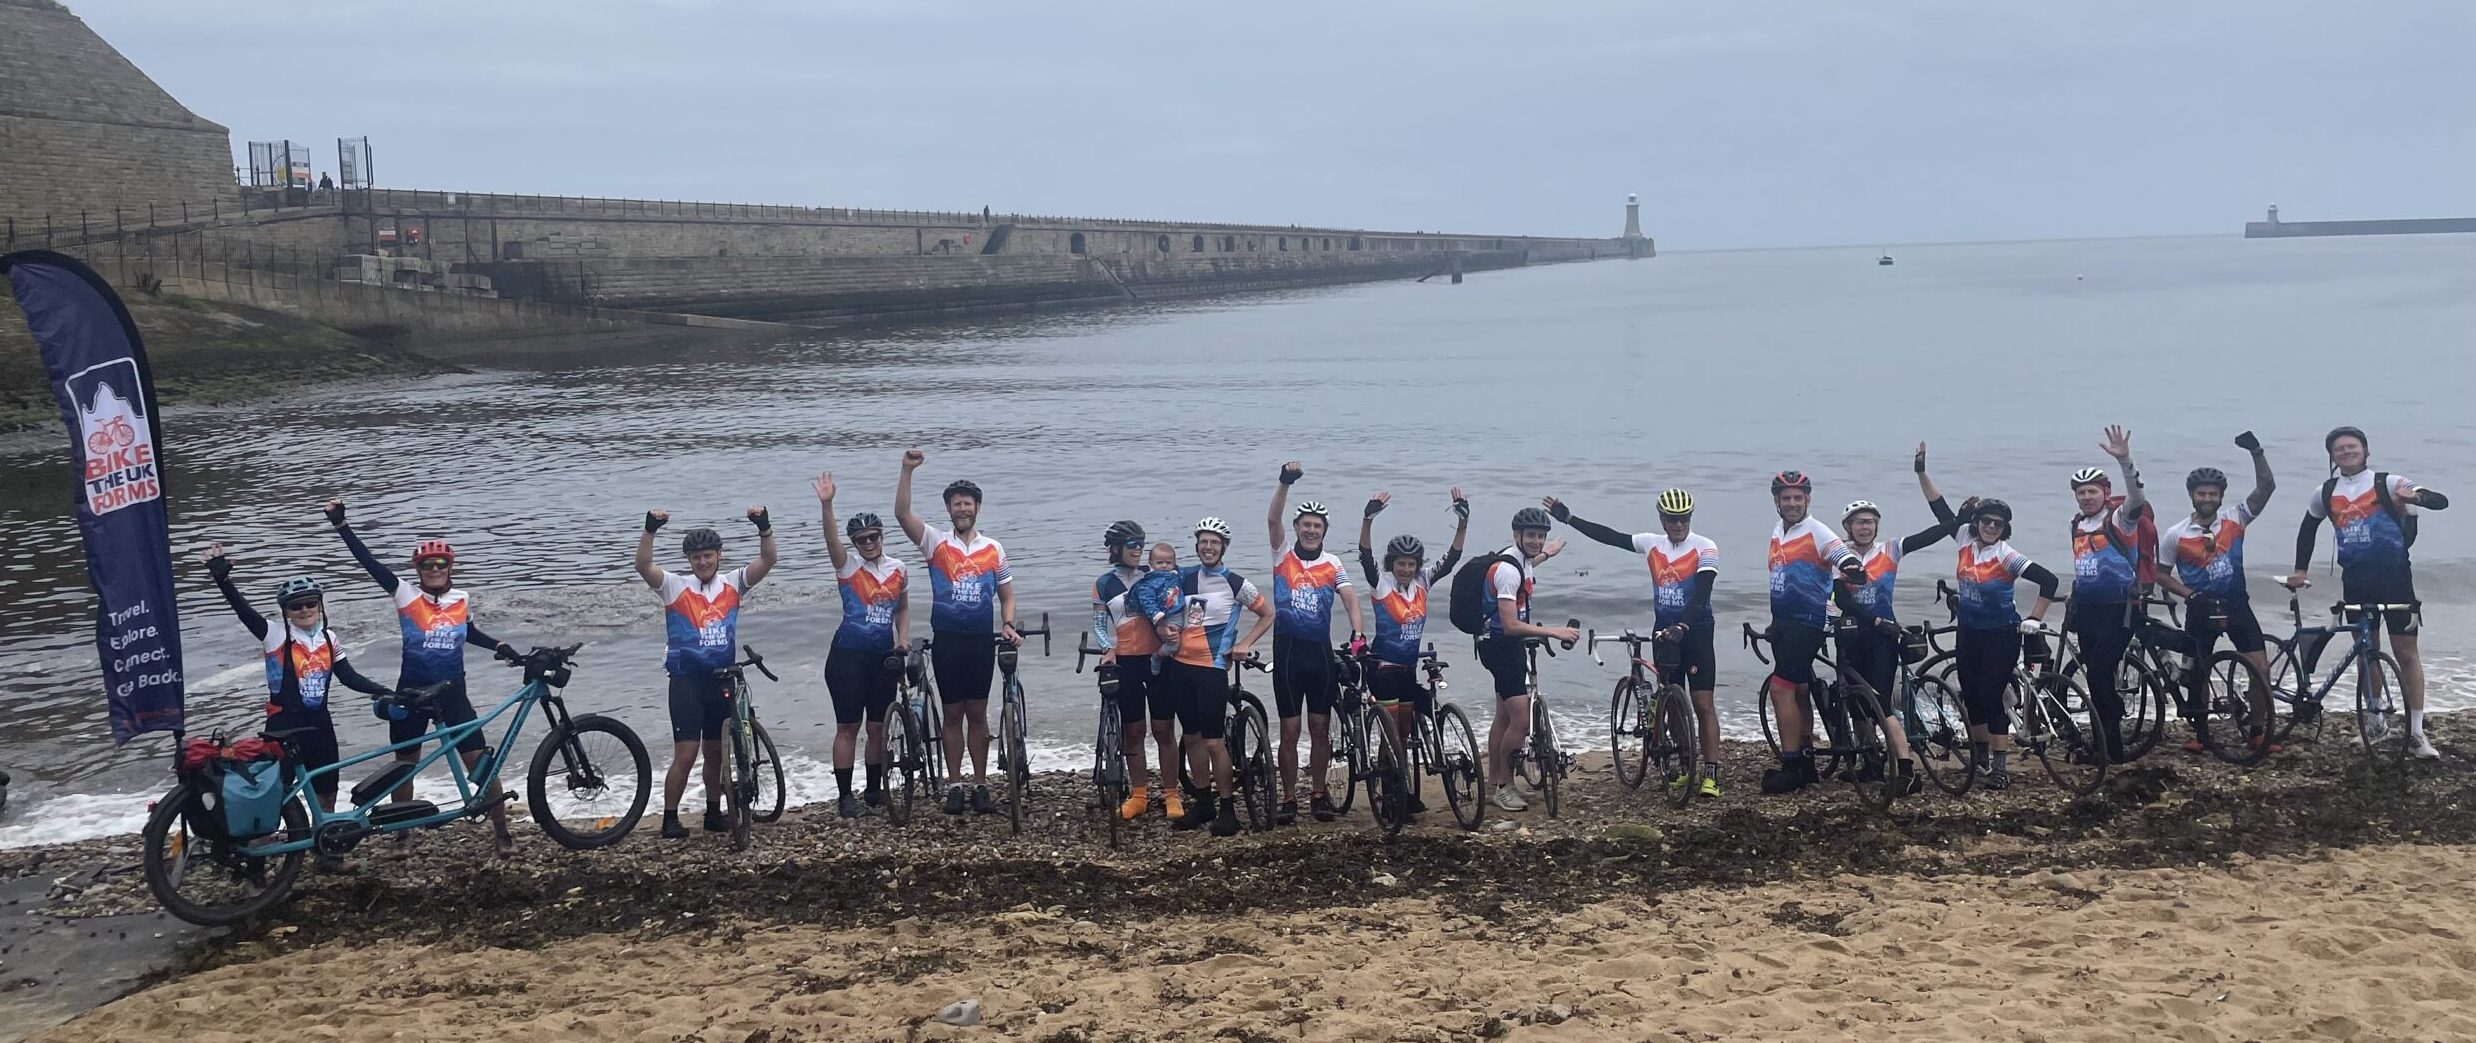 Celebrating the finish in Tynemouth having ridden from Whitehaven on the Sea to Sea